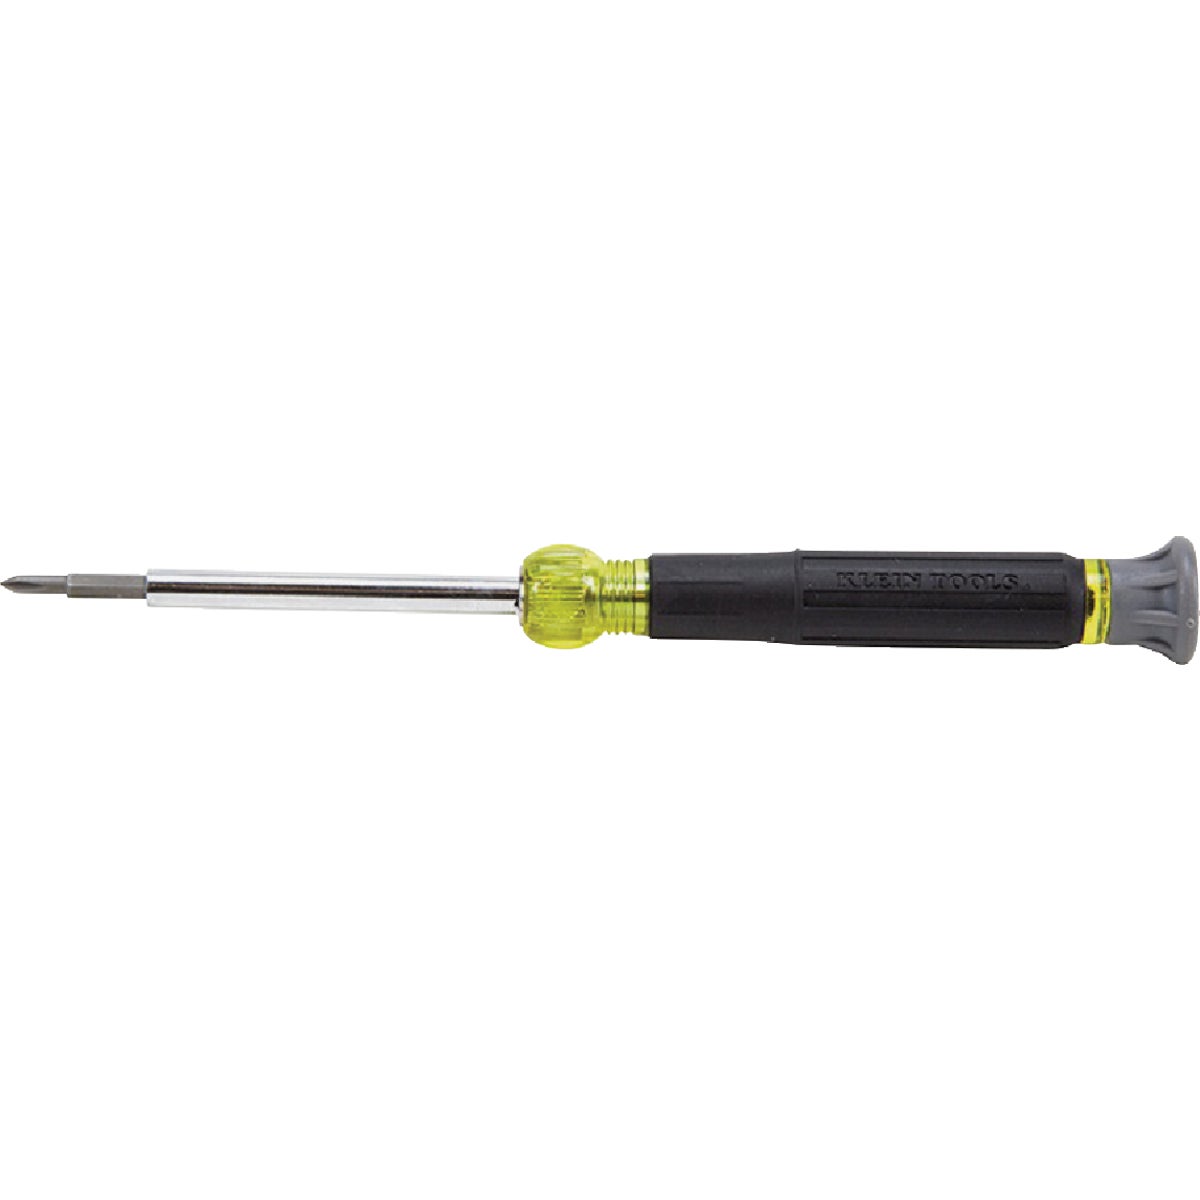 Klein 4-in-1 Electronics Precision Screwdriver with Rotating Cap